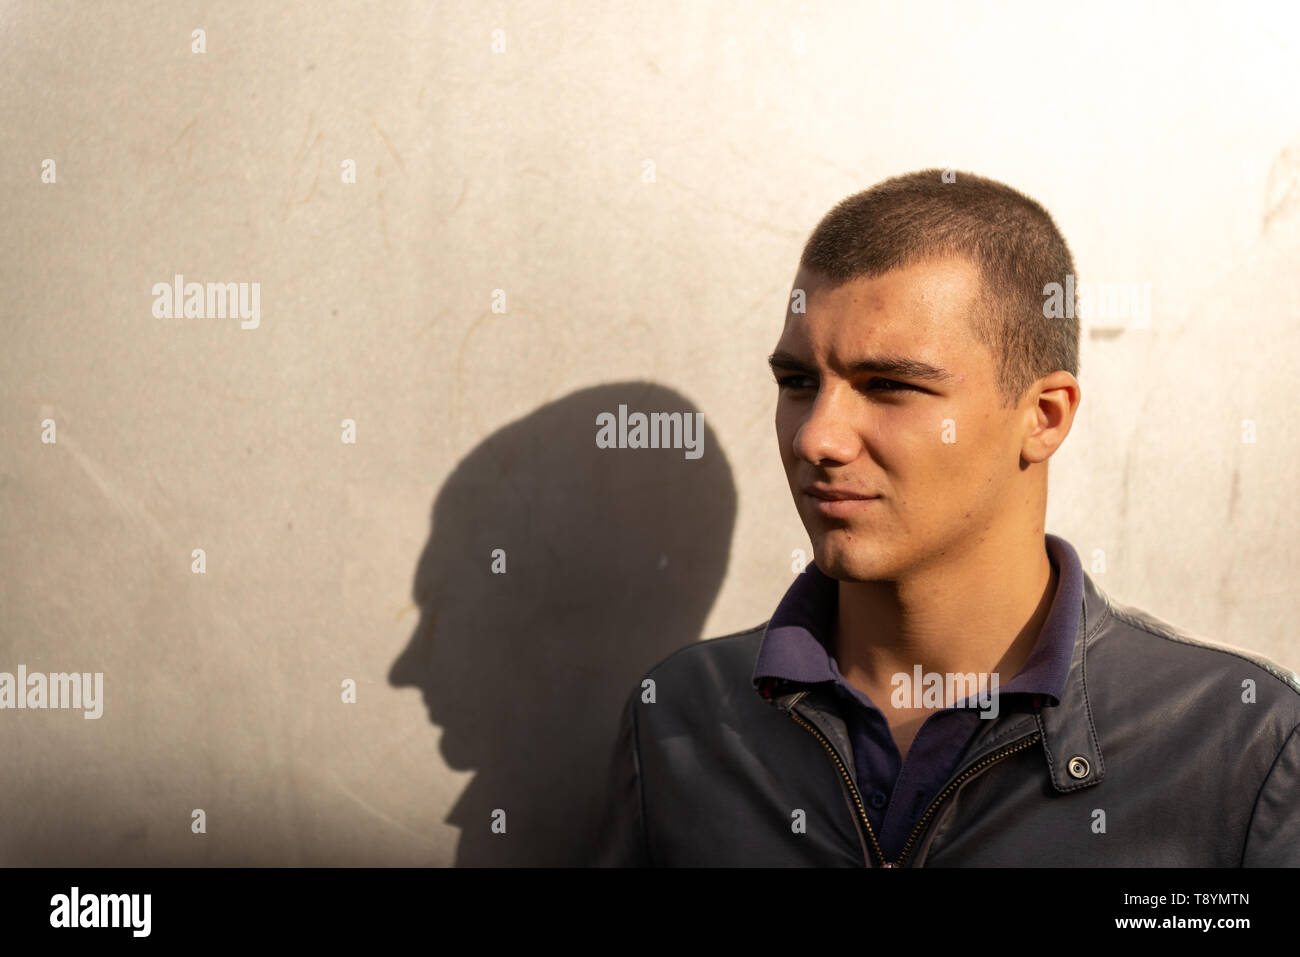 Portrait of 20-30 years young man and shadow looking away and brightly lit background wall Stock Photo